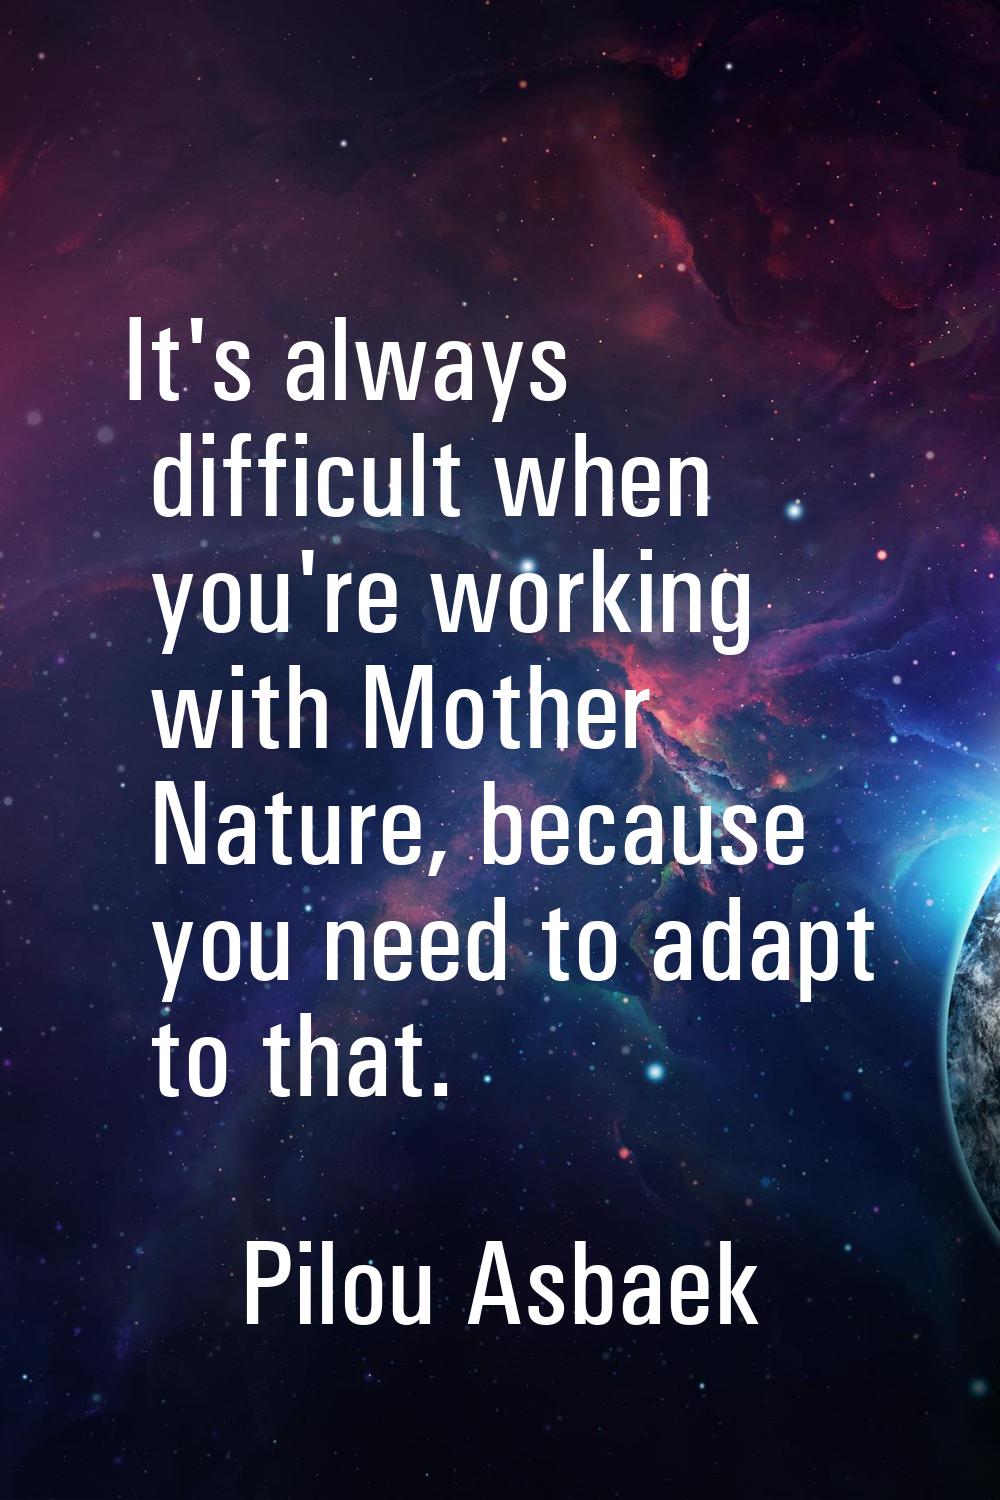 It's always difficult when you're working with Mother Nature, because you need to adapt to that.